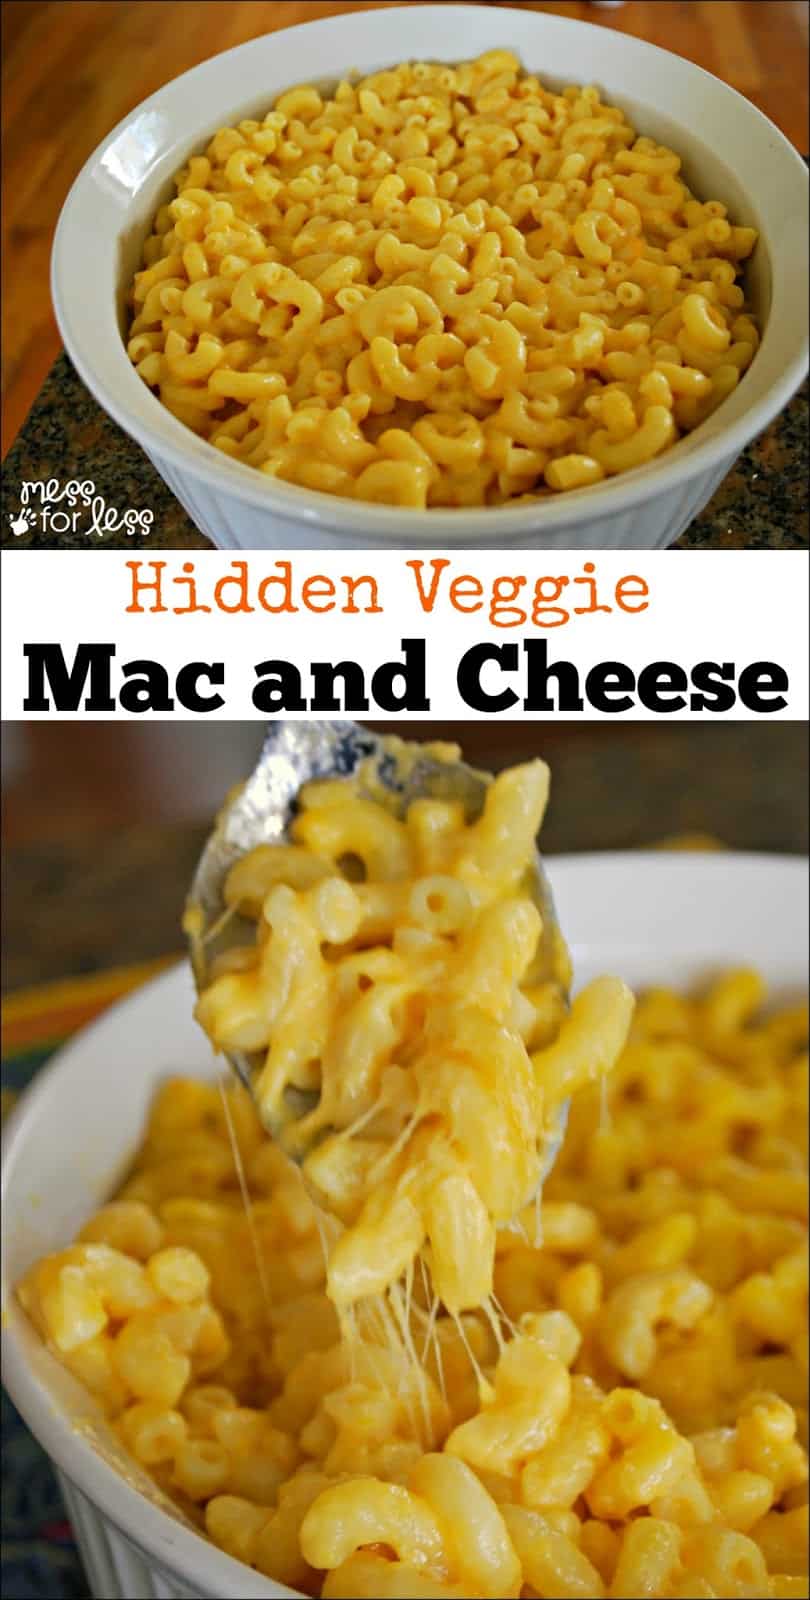 Hidden Veggie Baked Mac and Cheese - Food Fun Friday - Mess for Less